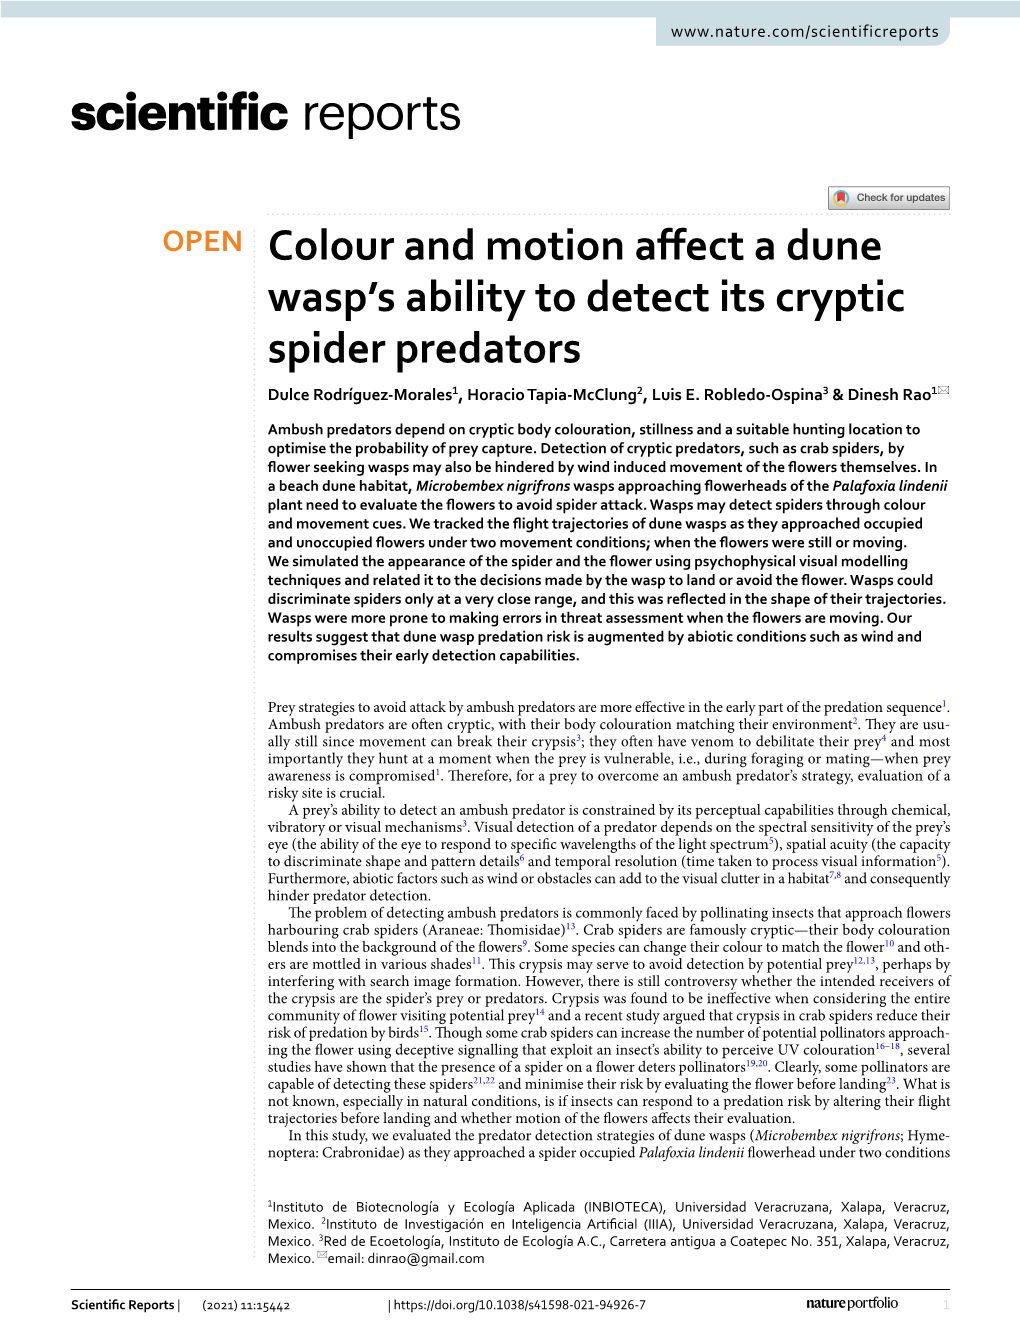 Colour and Motion Affect a Dune Wasp's Ability to Detect Its Cryptic Spider Predators